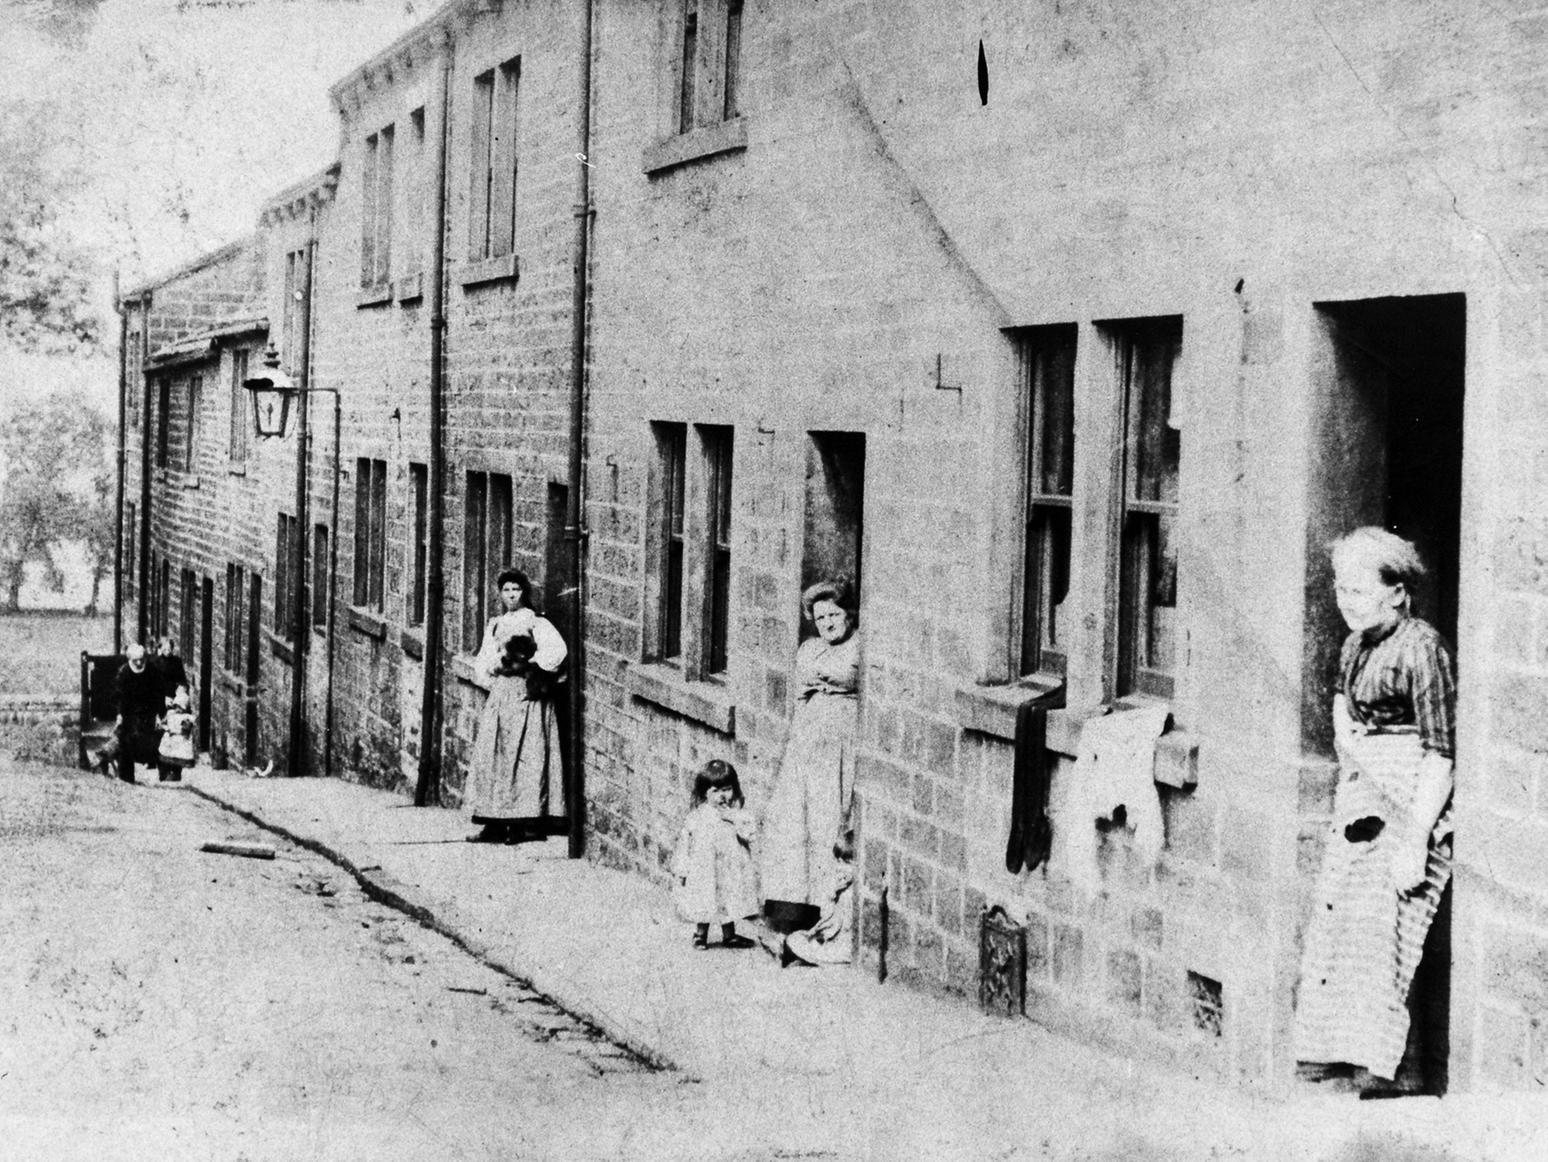 Back Wood Street in Rodley. Pictured in the late 19th century.